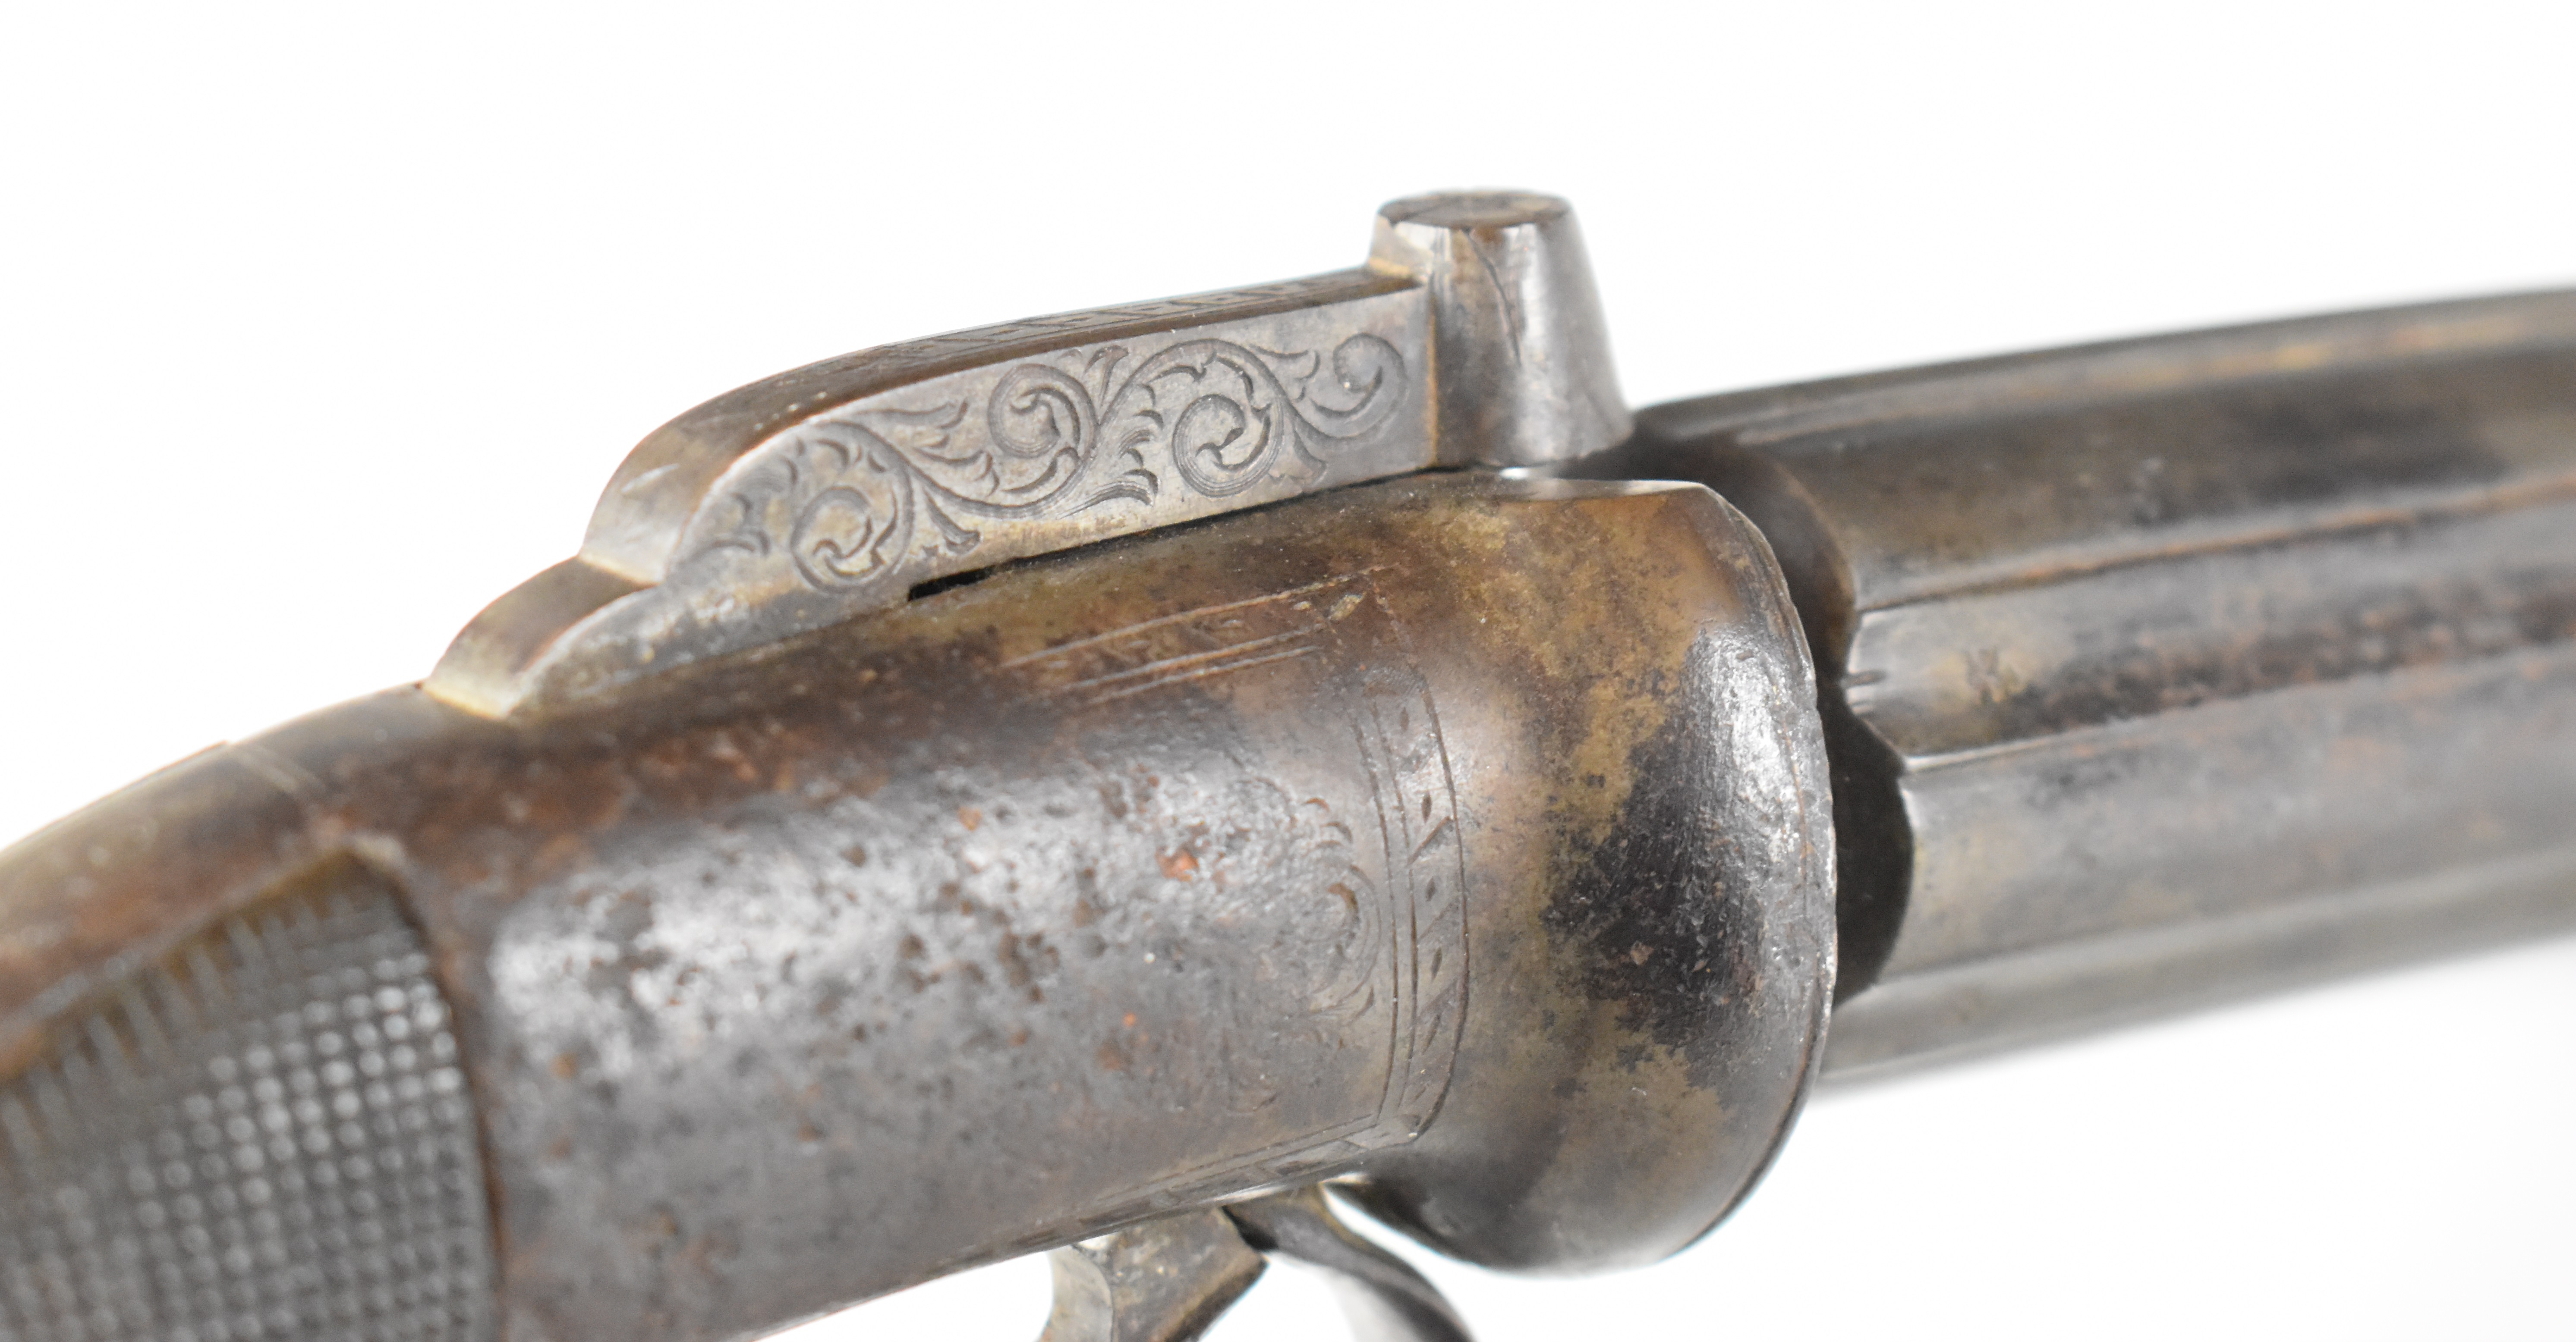 Unnamed six-shot bar hammer action percussion pepperbox revolver or pistol with engraved lock, top - Image 12 of 15